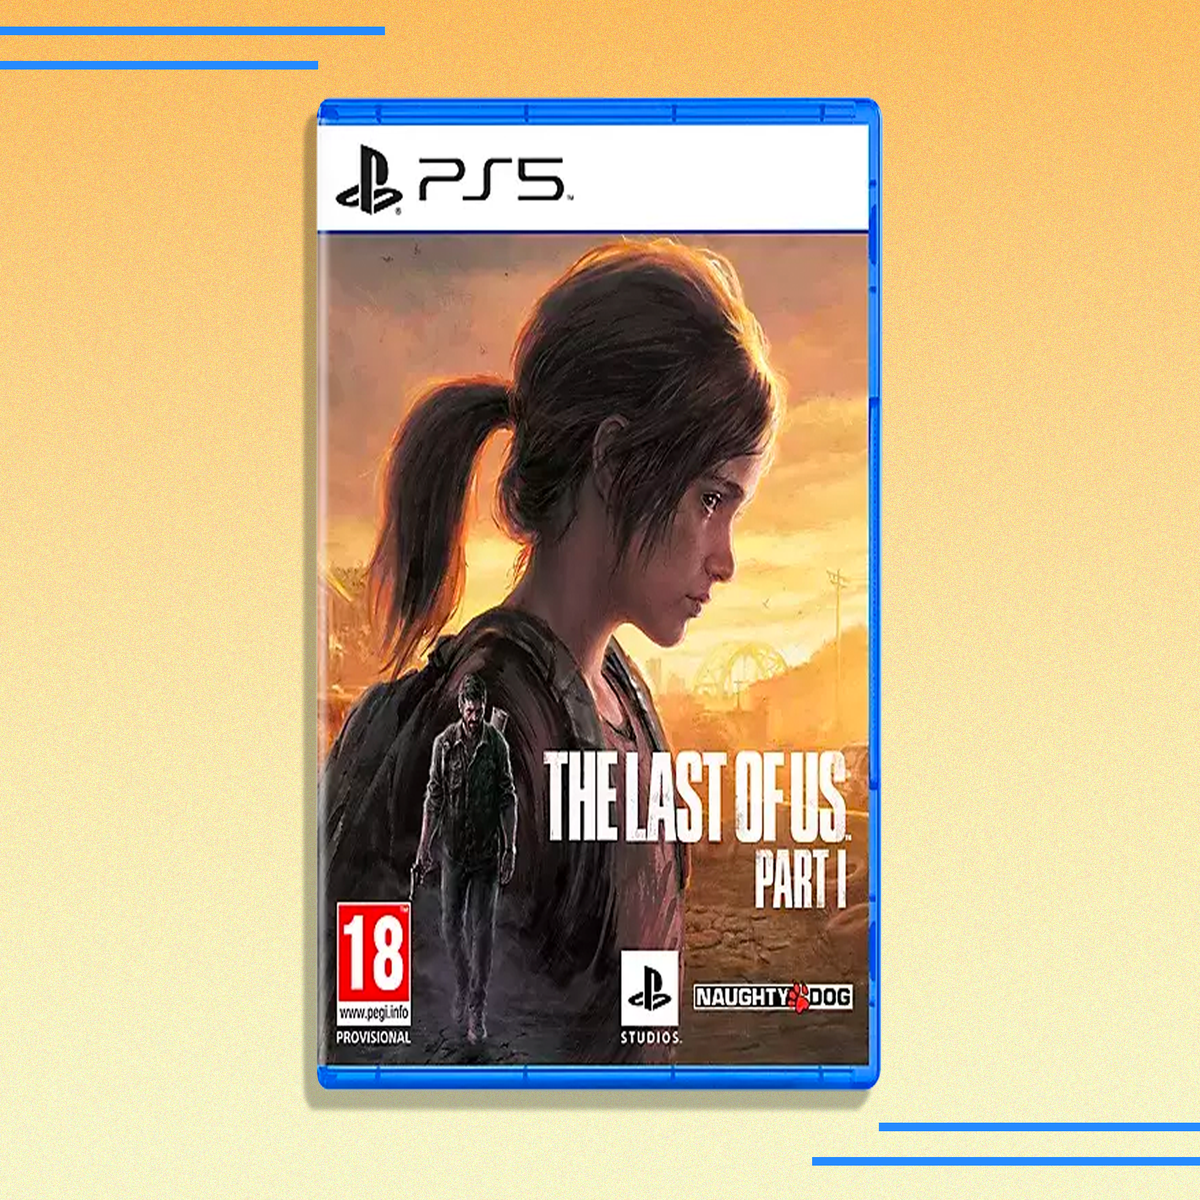 Who voices Ellie in The Last of Us Part 1?